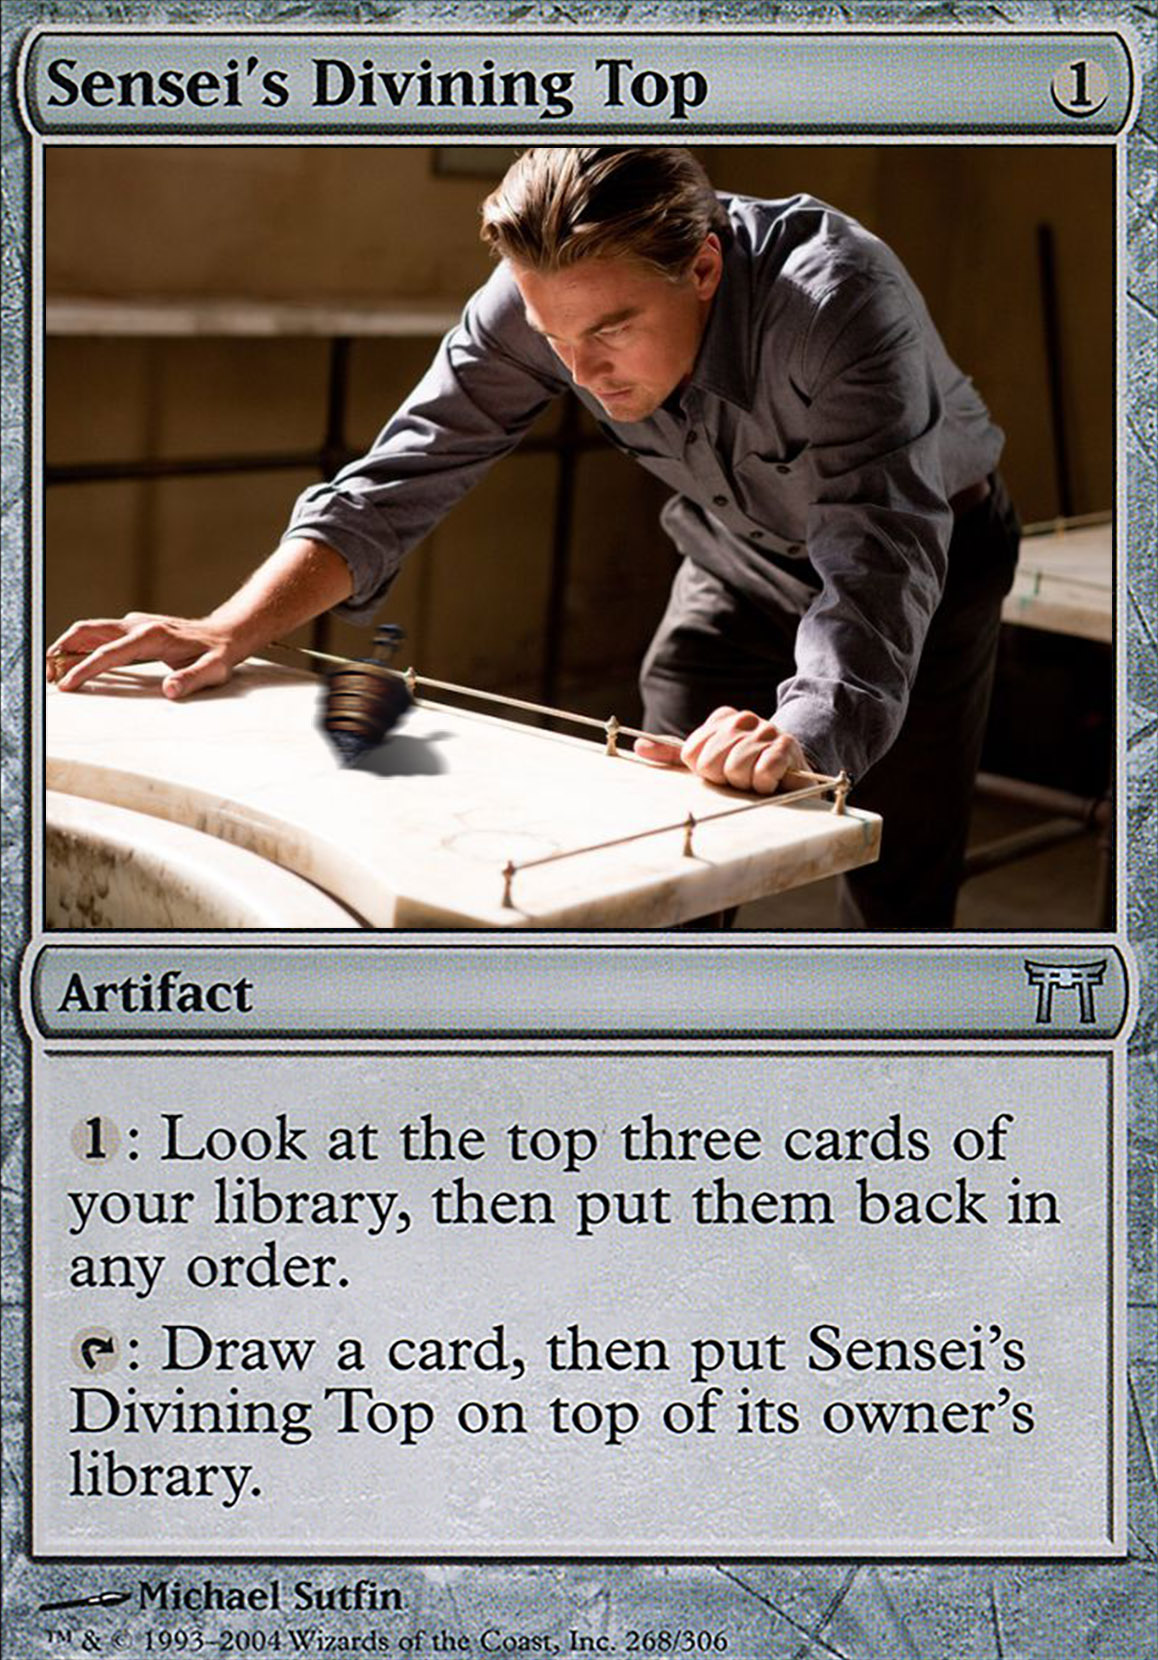 Sensei's Divining Top feature for INCEPTION